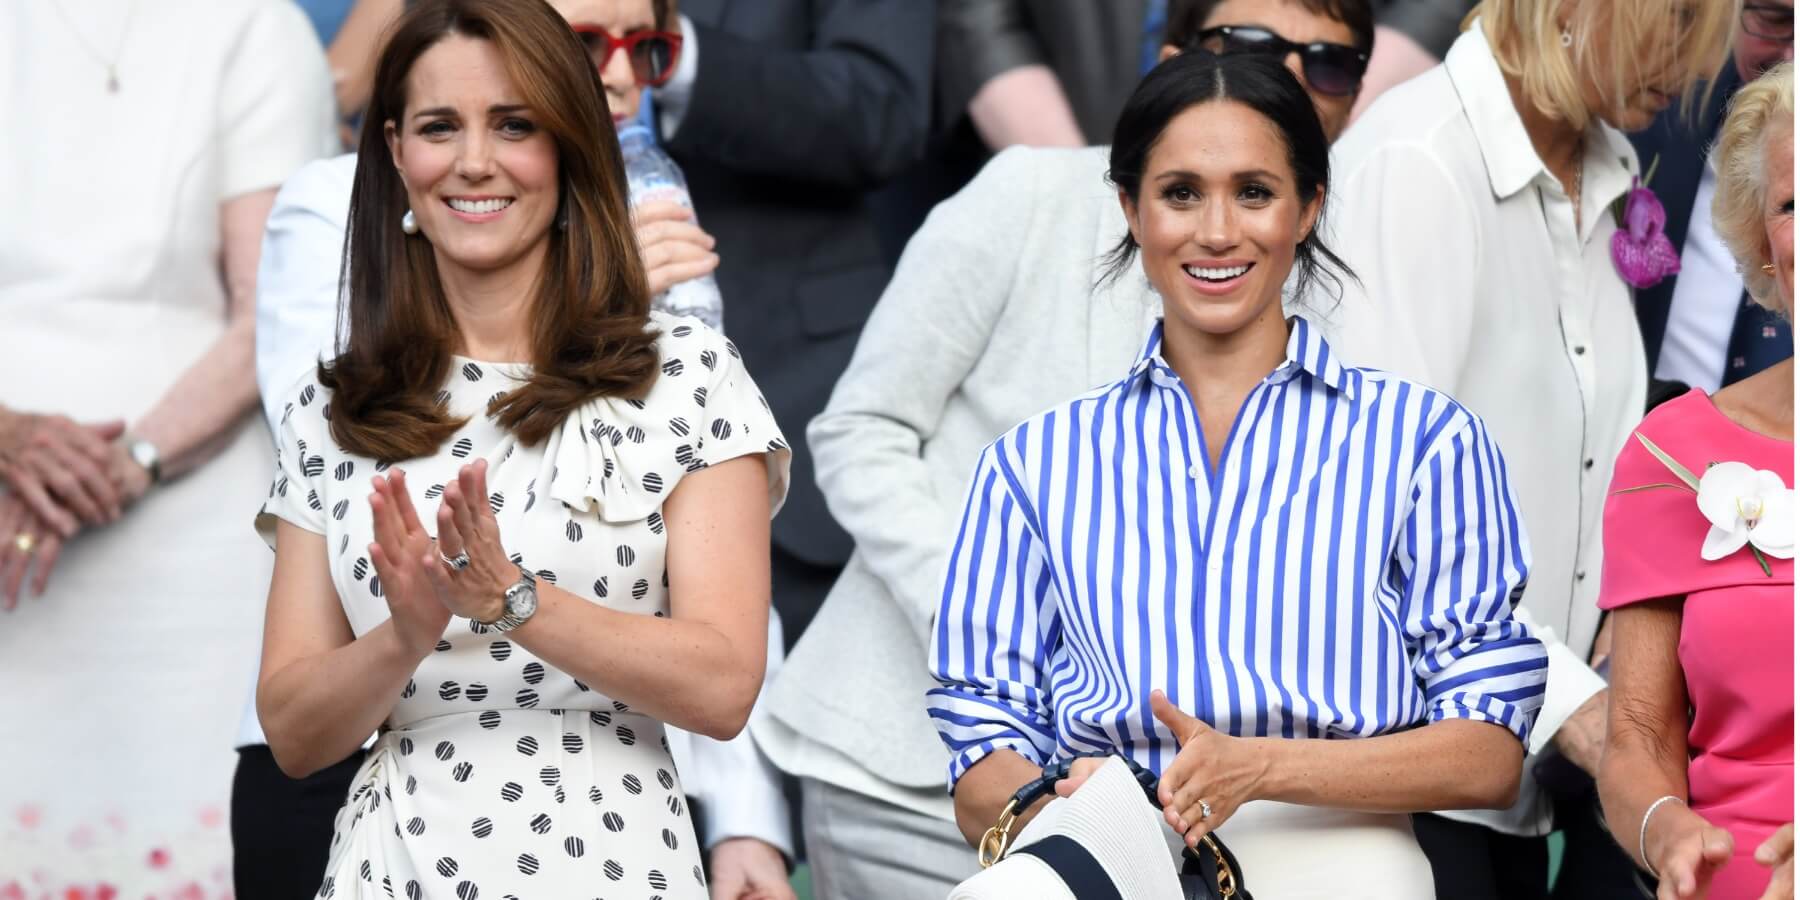 Kate Middleton and Meghan Markle pictured together in July 2018 in London, England.